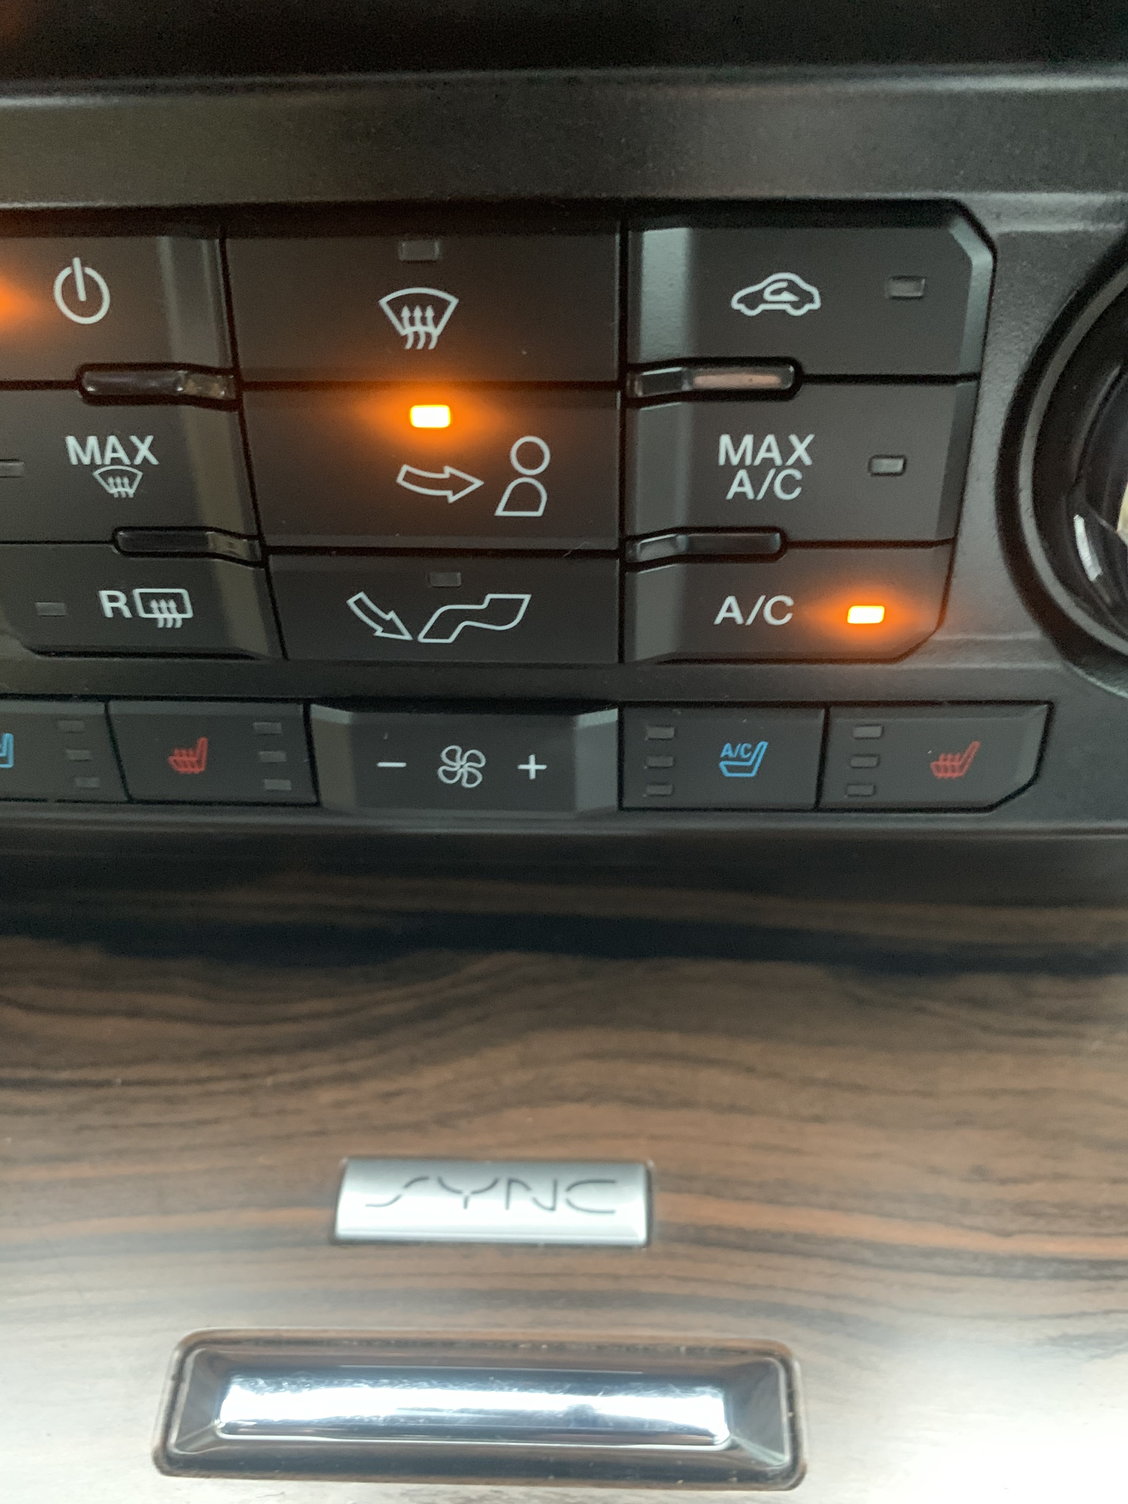 f150 lariat 2007 climate control stereo upgrade